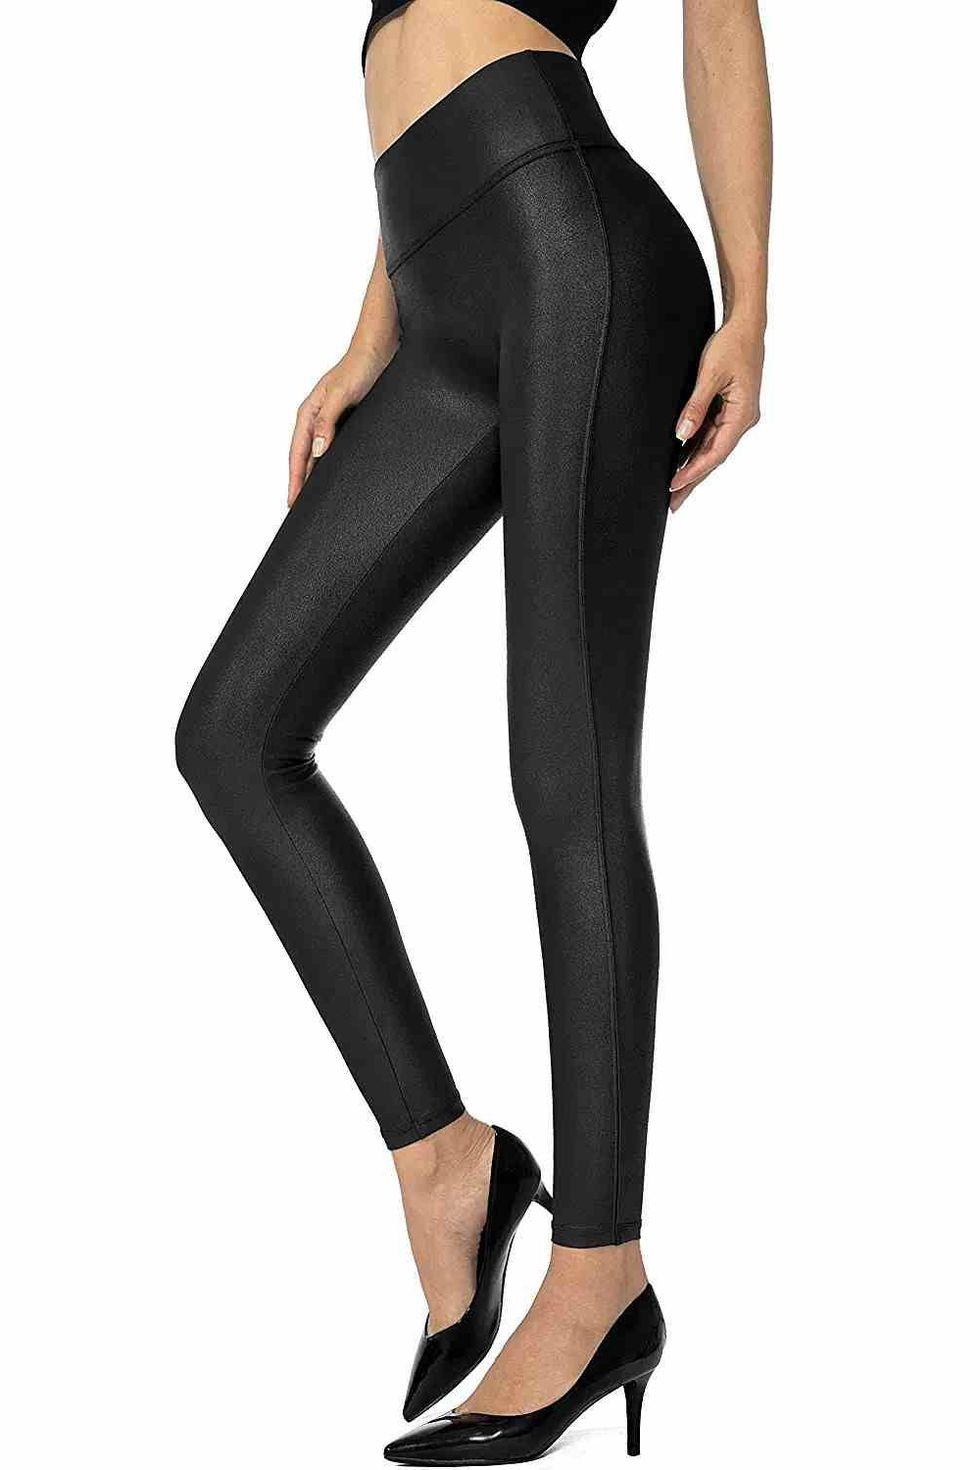 Women Fleece Lined Faux Leather Leggings, Warm High Waisted Yoga Pants  Workout Stretchy Faux Leather Leggings Pants Sexy High Waisted Tights 